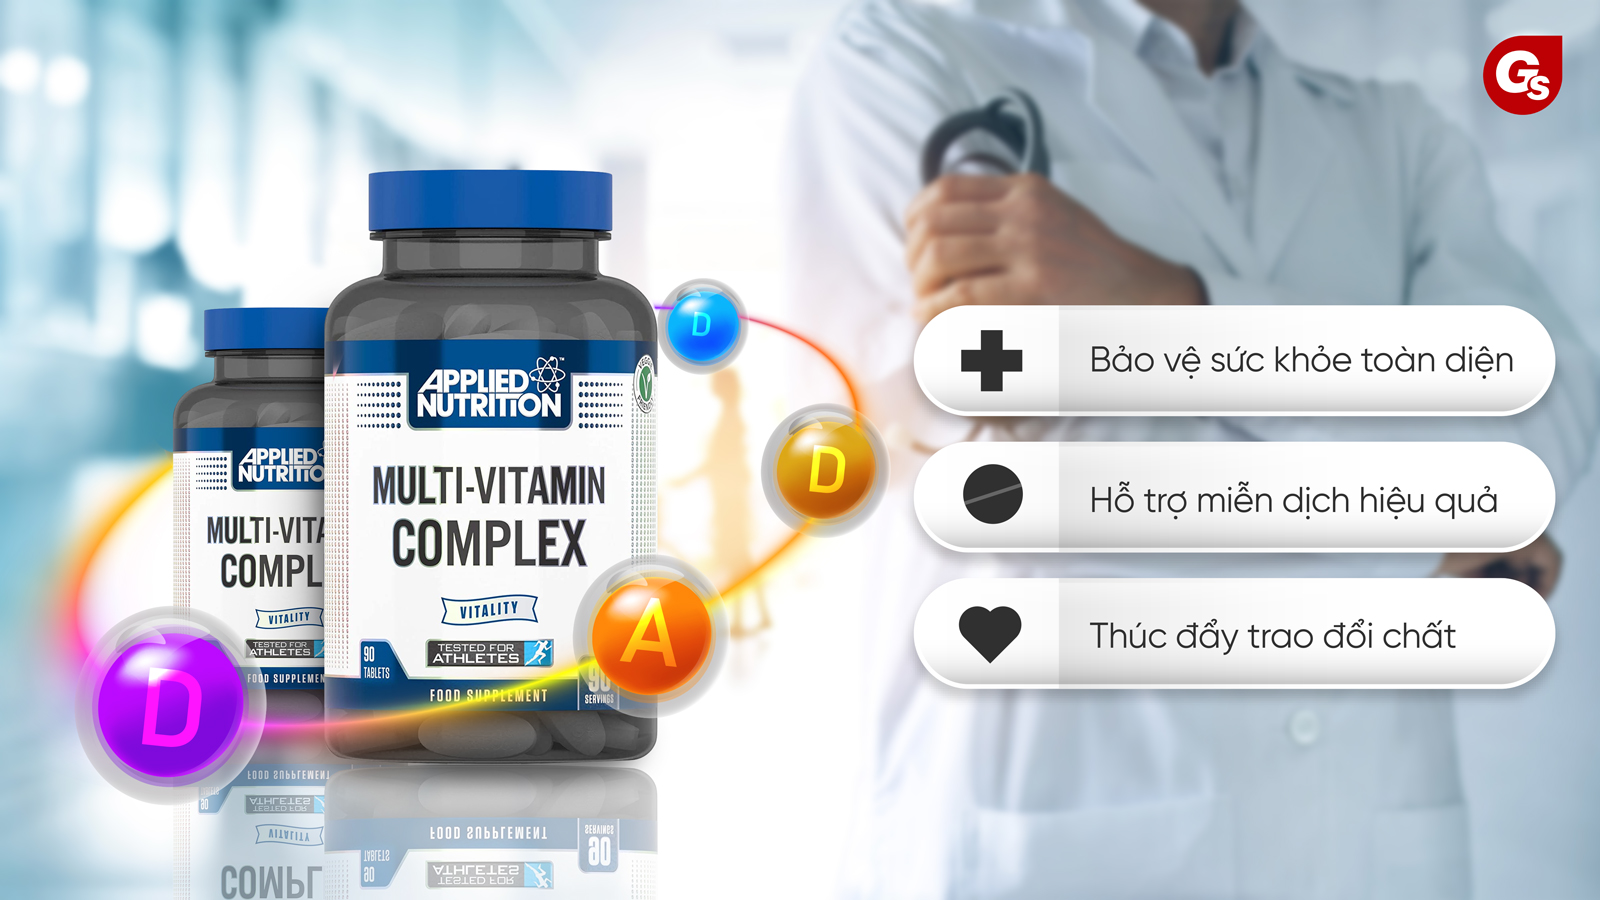 cong-dung-cua-applied-nutrition-multi-vitamin-complex-gymstore-1